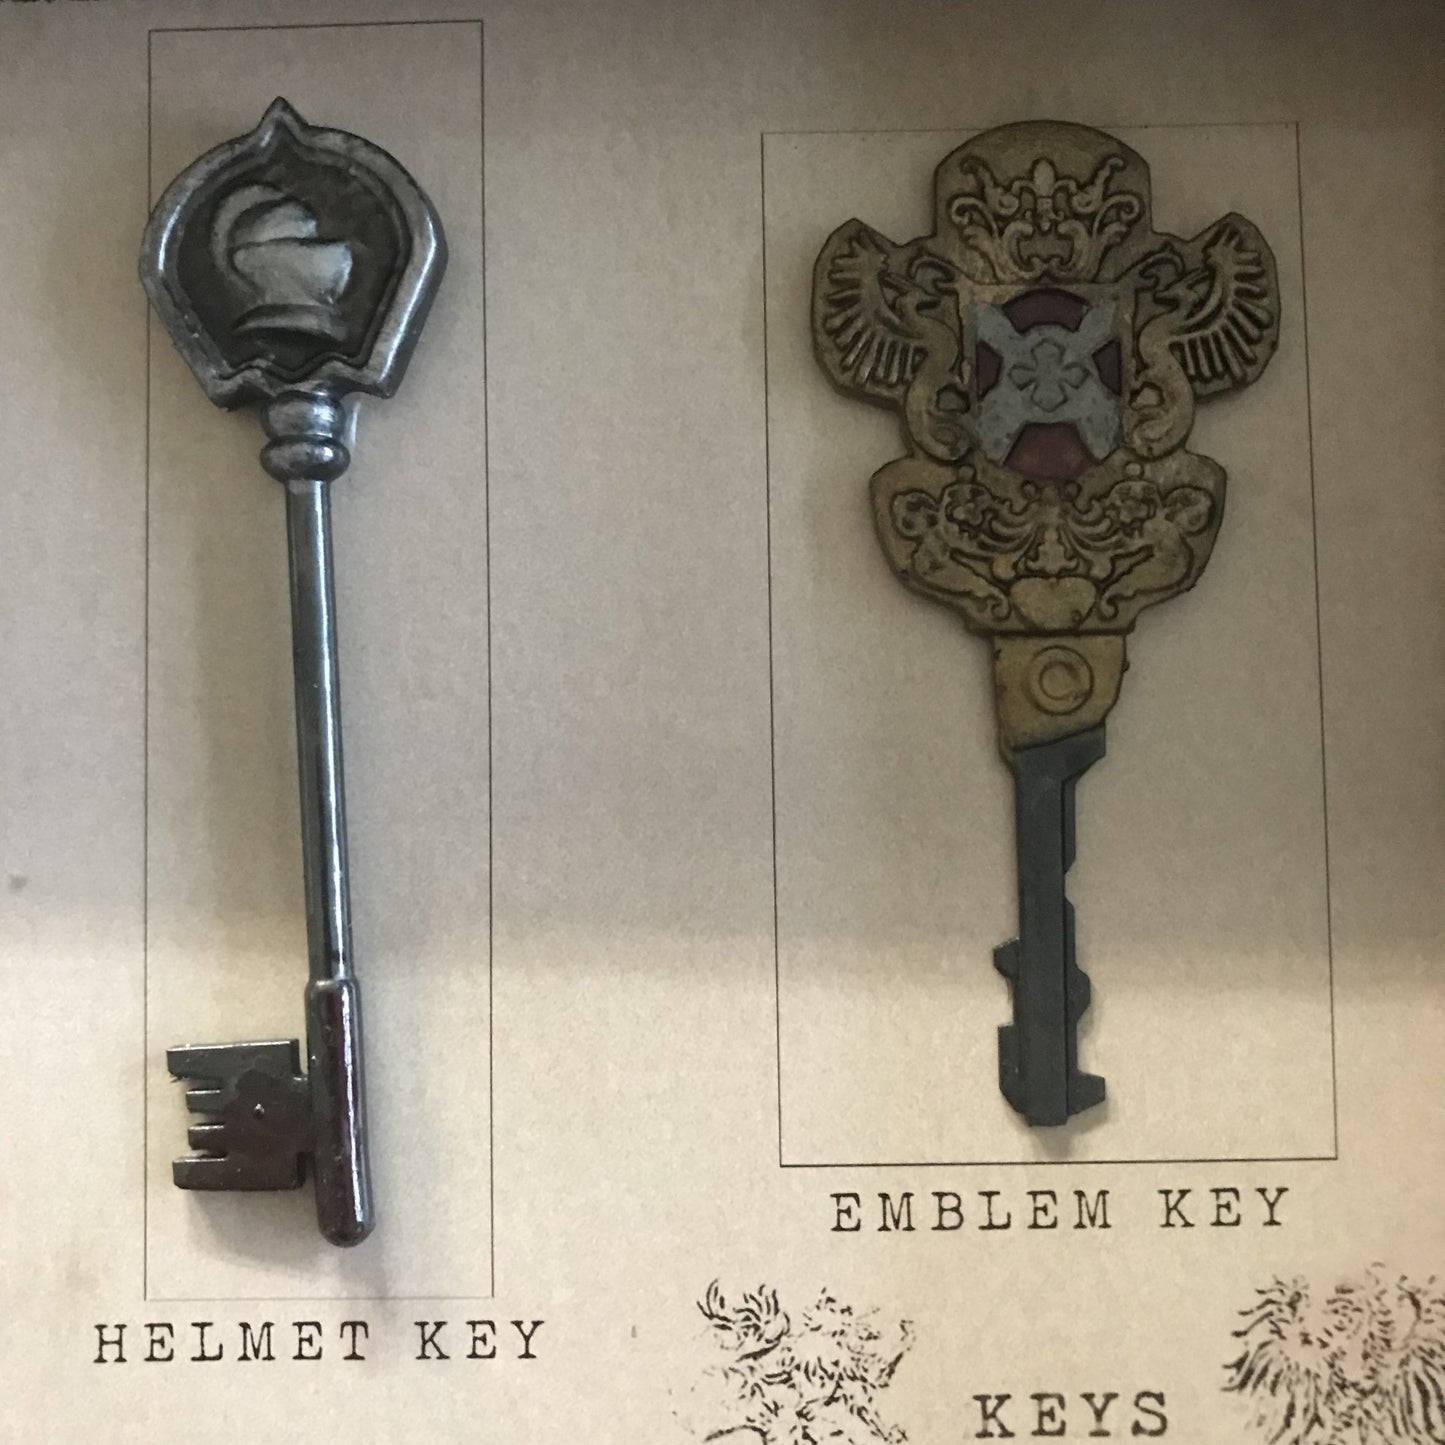 Resident Evil 1 Full Key Collection - A3 Size - Solid Resin Keys all handcrafted, painted and mounted! Perfect Mancave or Womencave gift